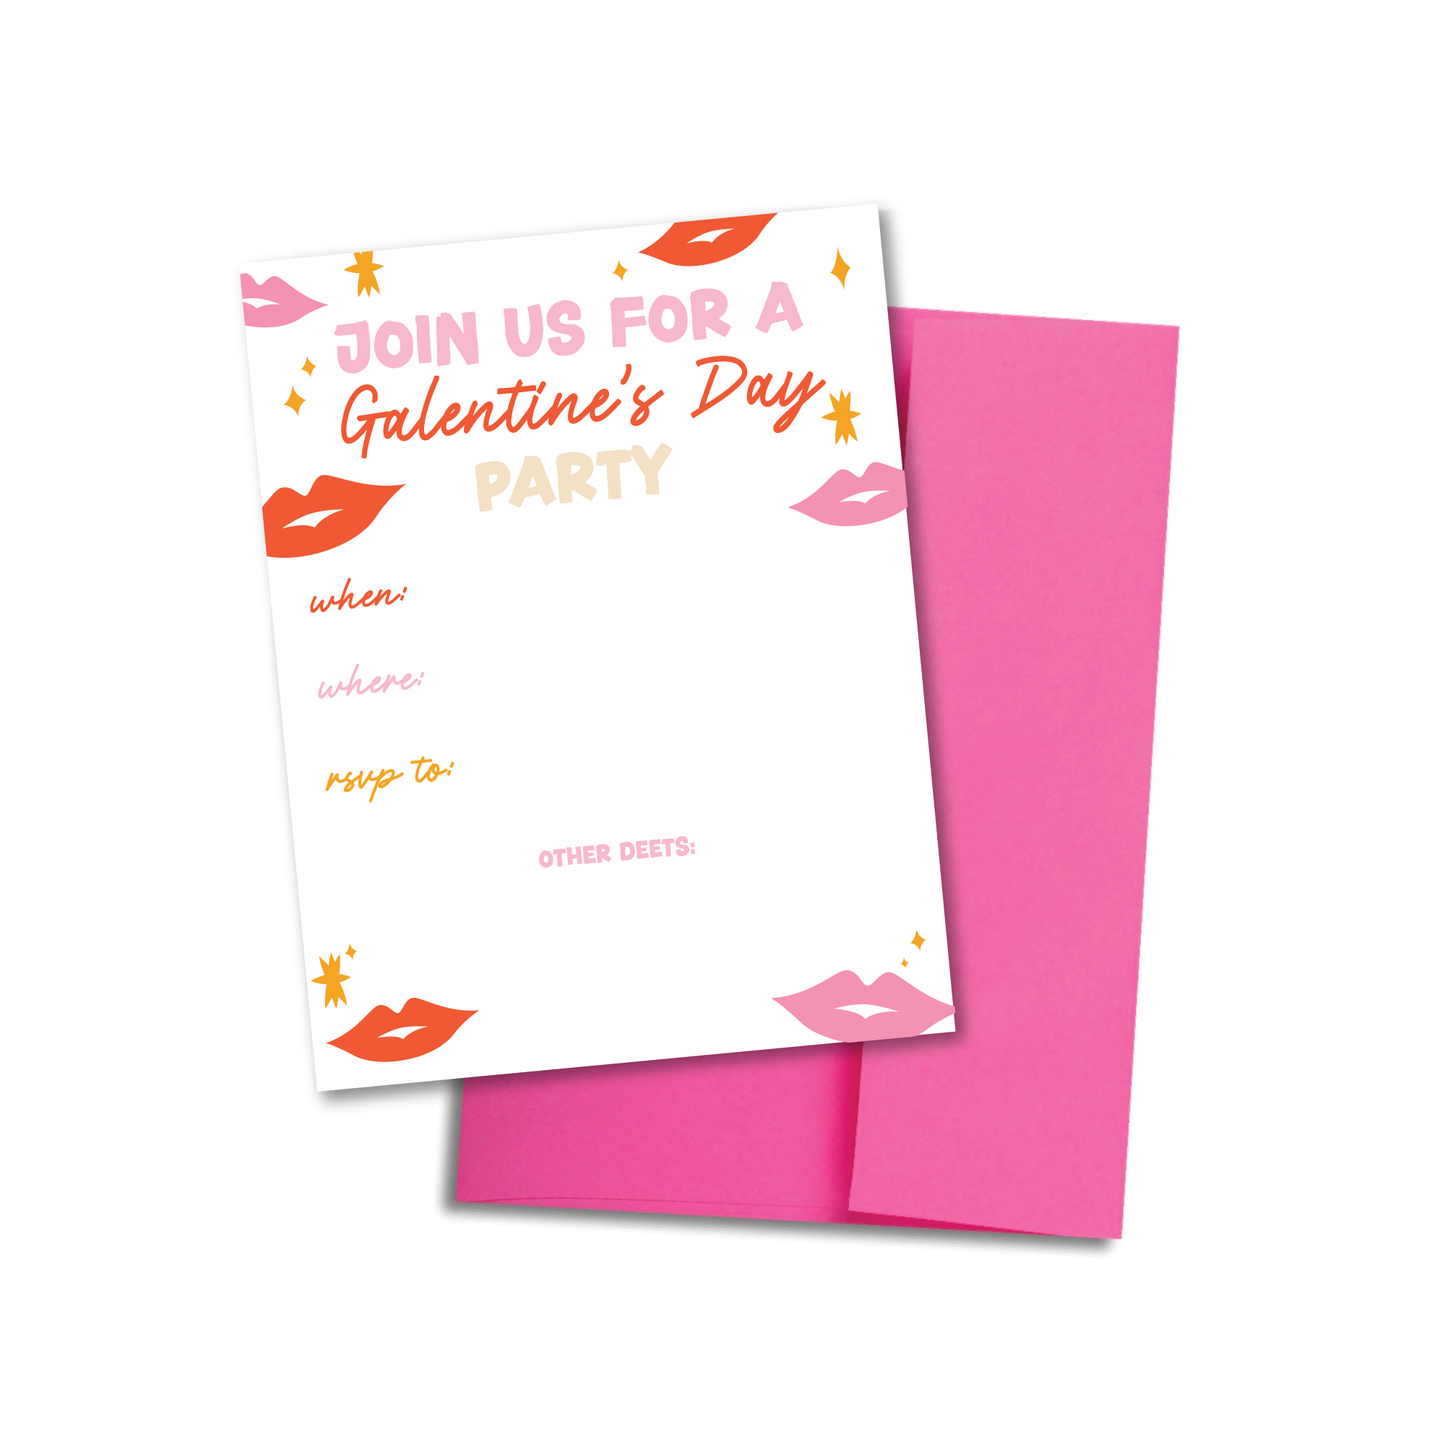 Galentine's Day Party Invitation Set of 24